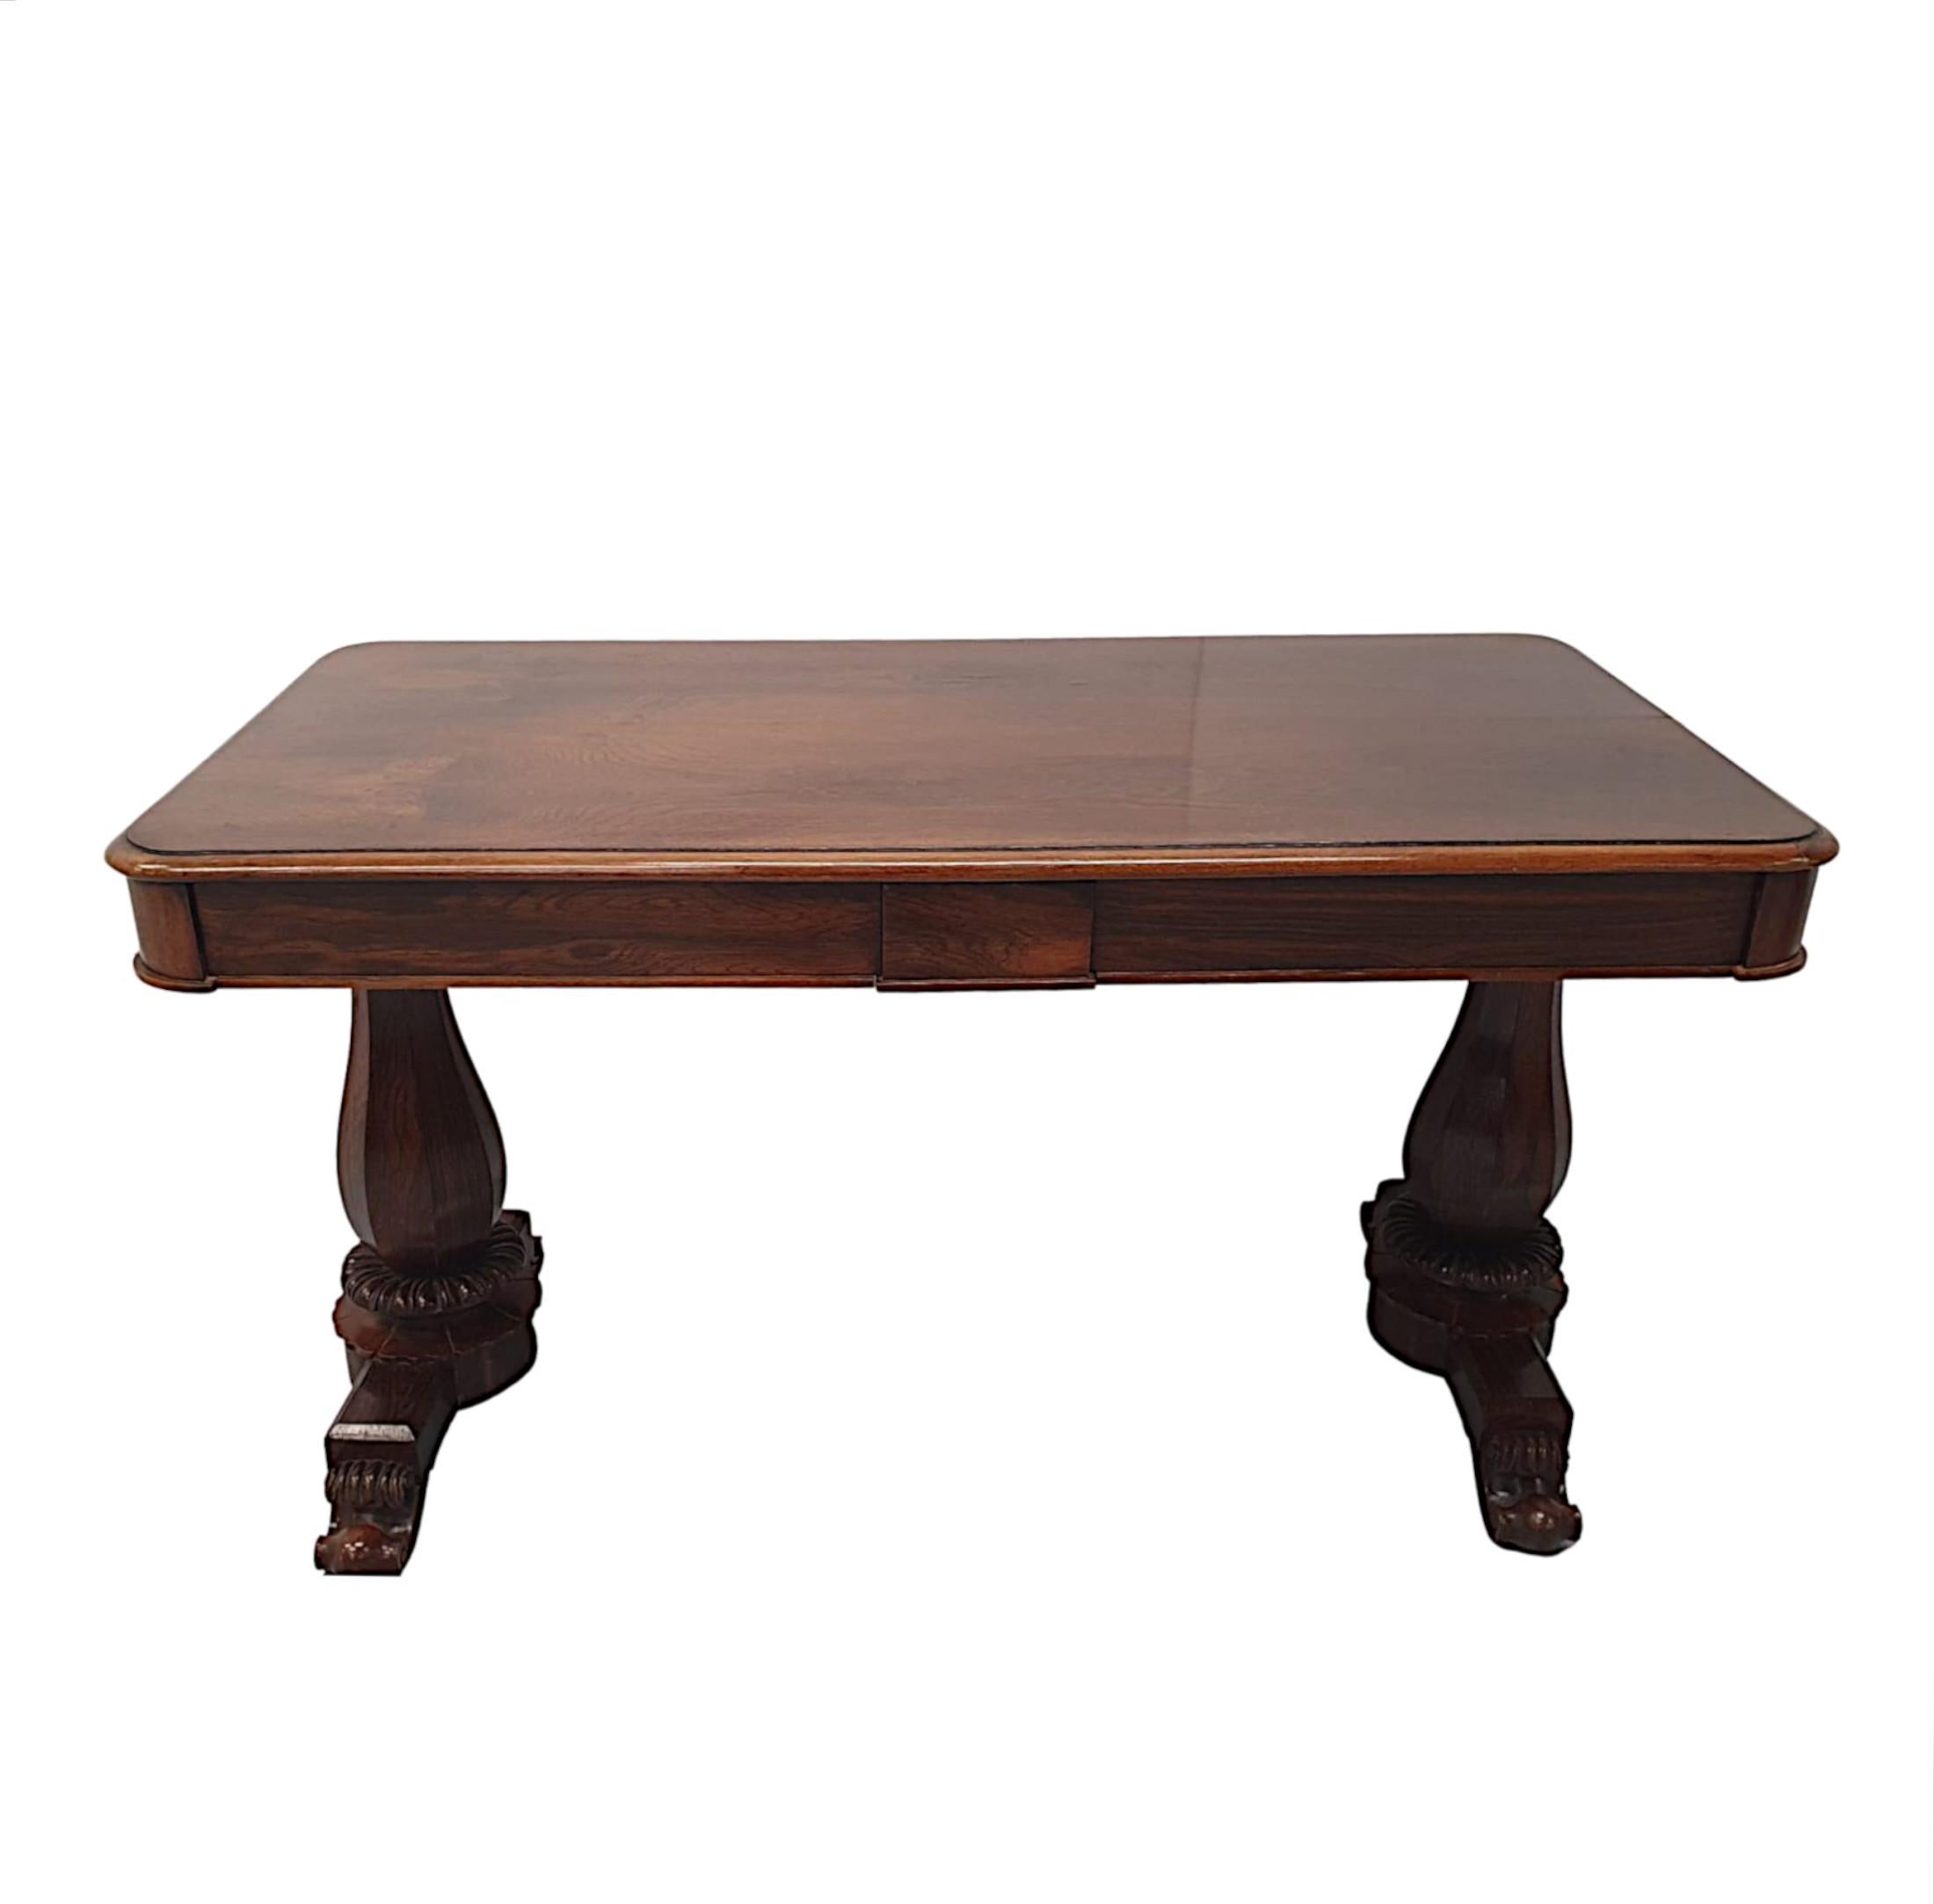 A fine 19th century Irish fruitwood library table in the manner of Williams and Gibton, fabulously hand carved with gorgeously rich patination and grain. The moulded top of rectangular form with curved corners raised over simple frieze with roundel